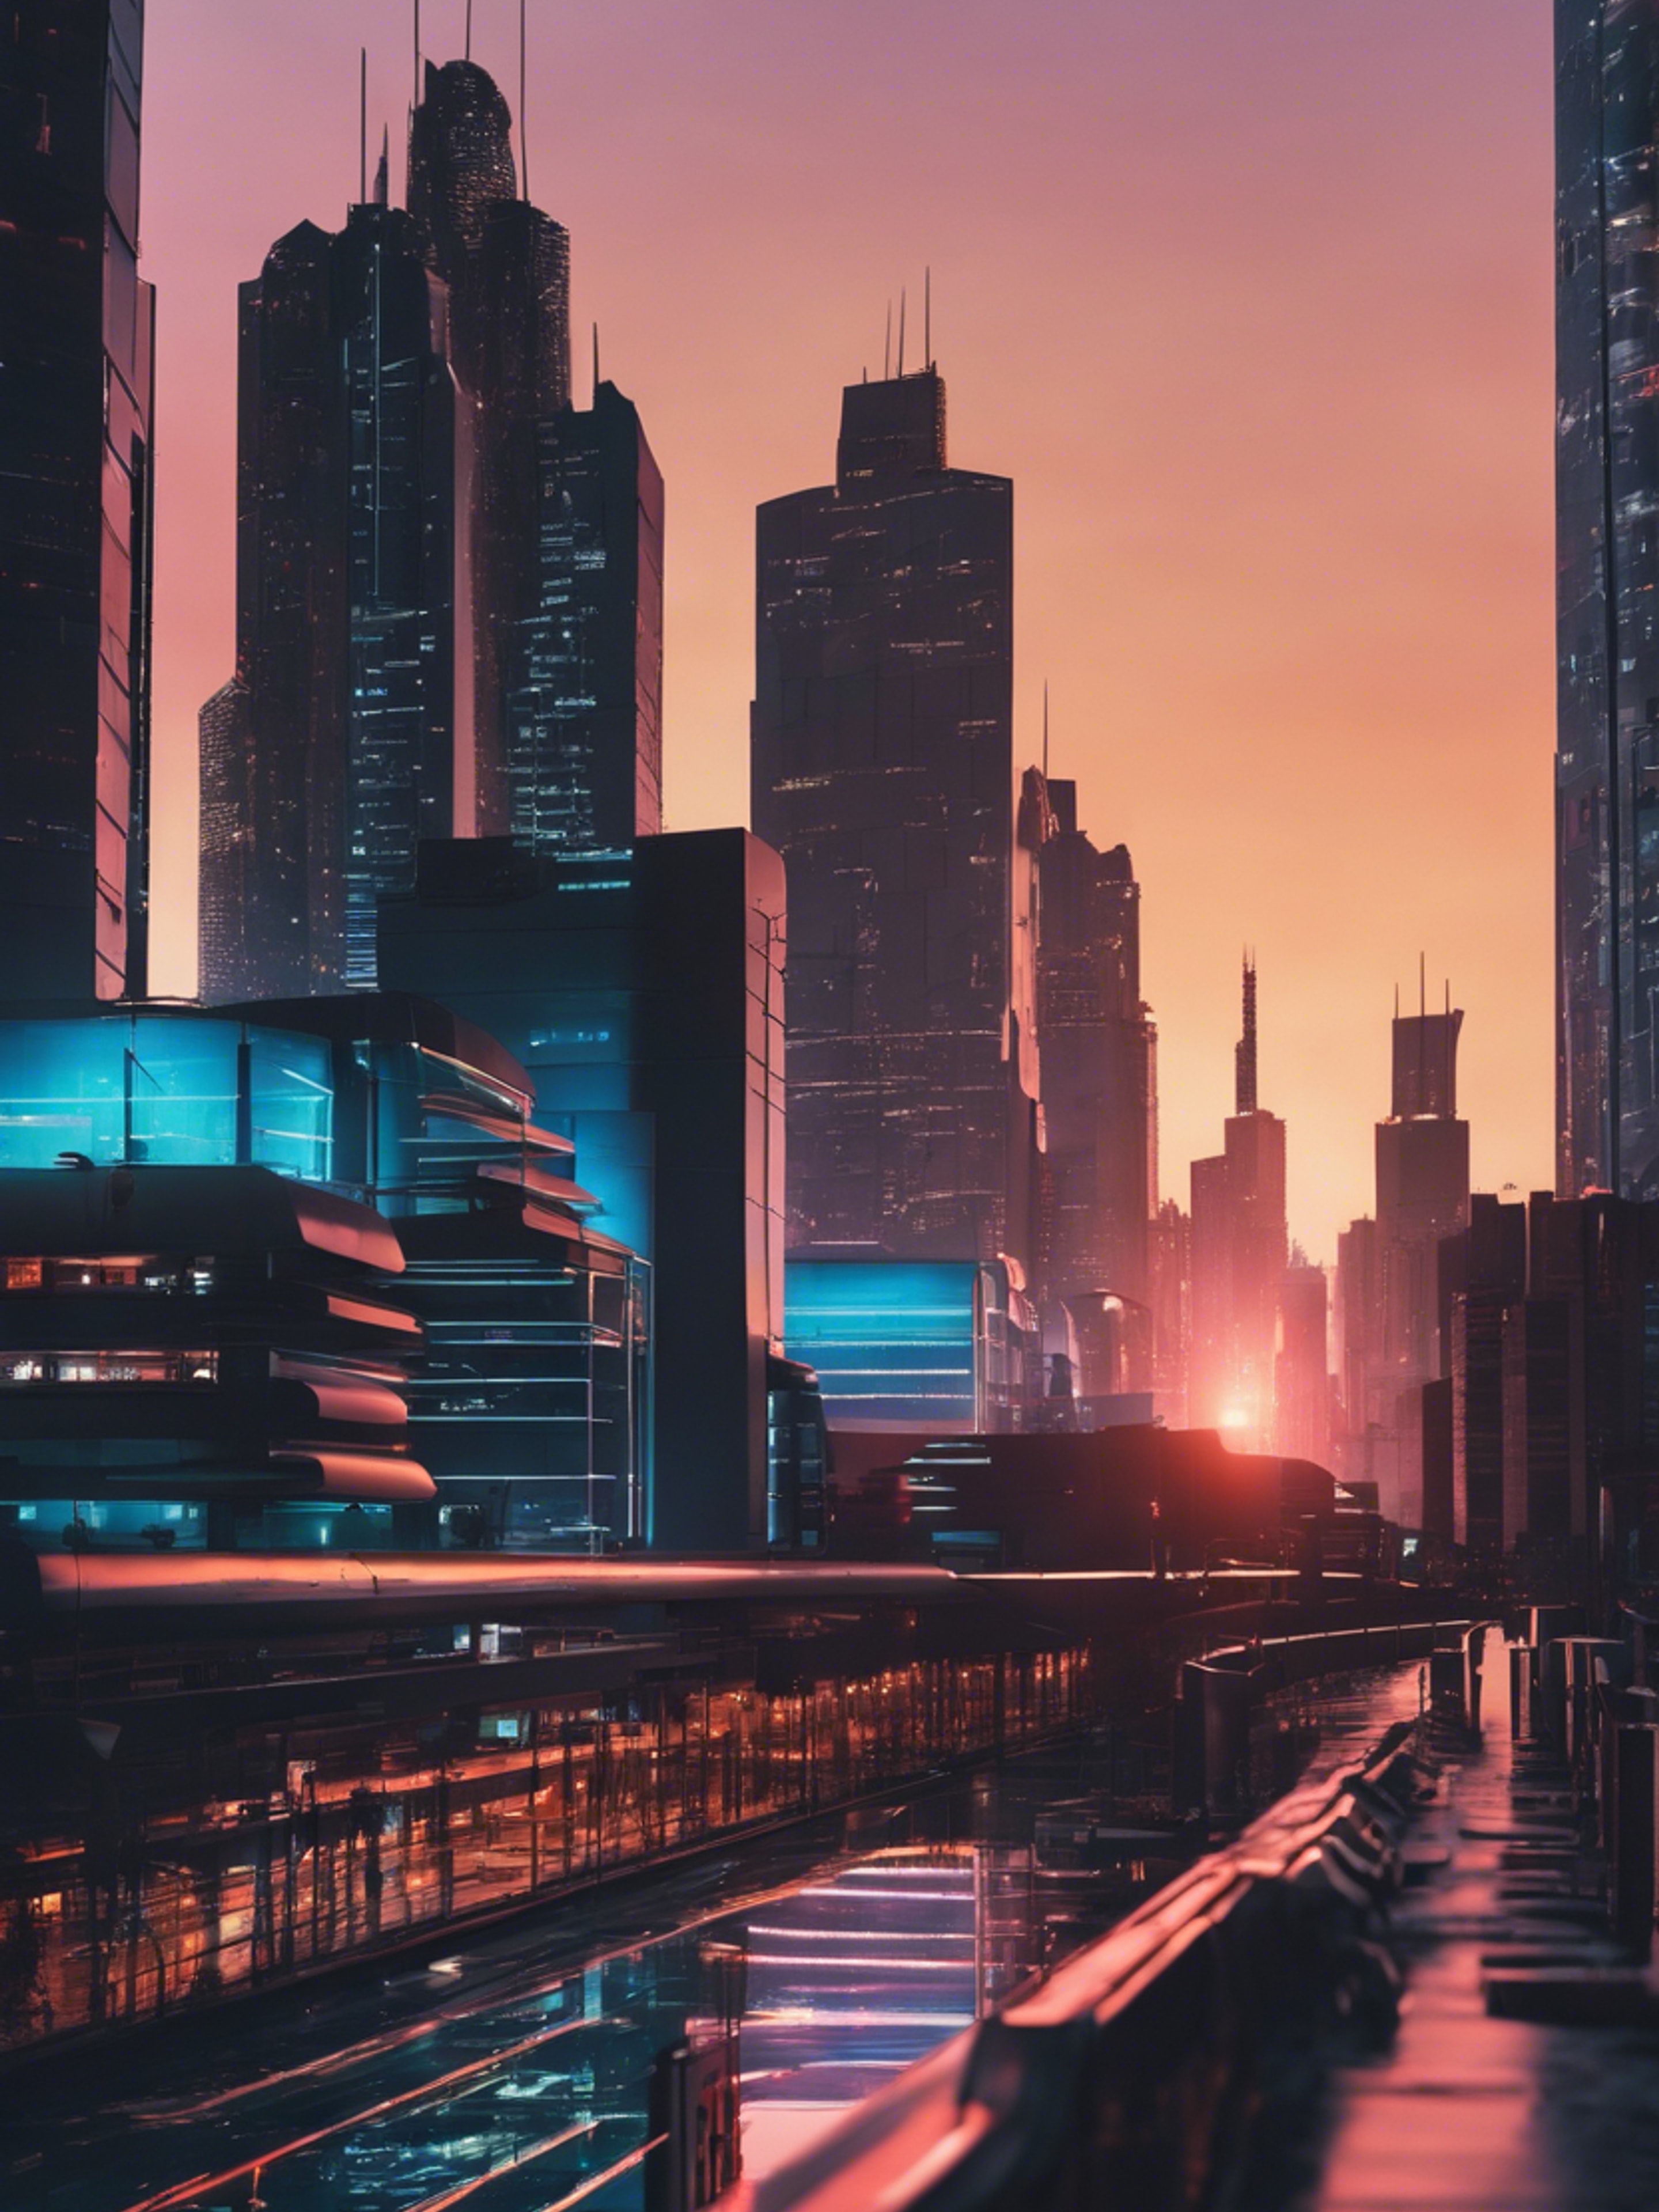 A sleek, futuristic cityscape at sunset, with buildings made of reflective black glass, sparking with cool neon lights. Behang[602b1b36f4744978842c]